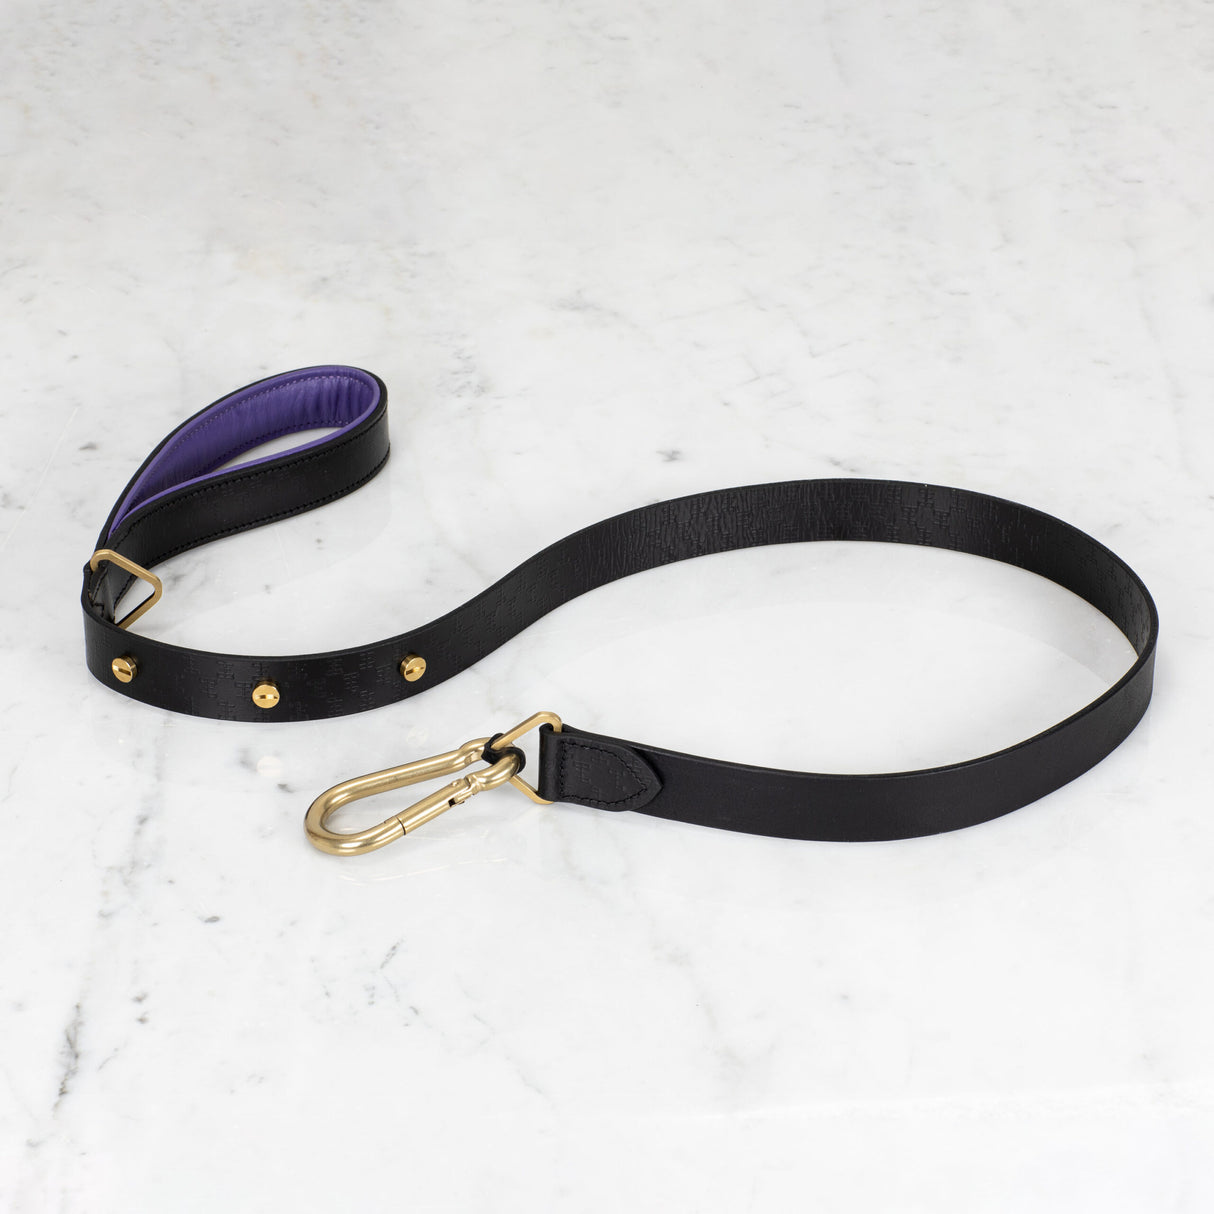 Buster Black and Purple Dog Leash